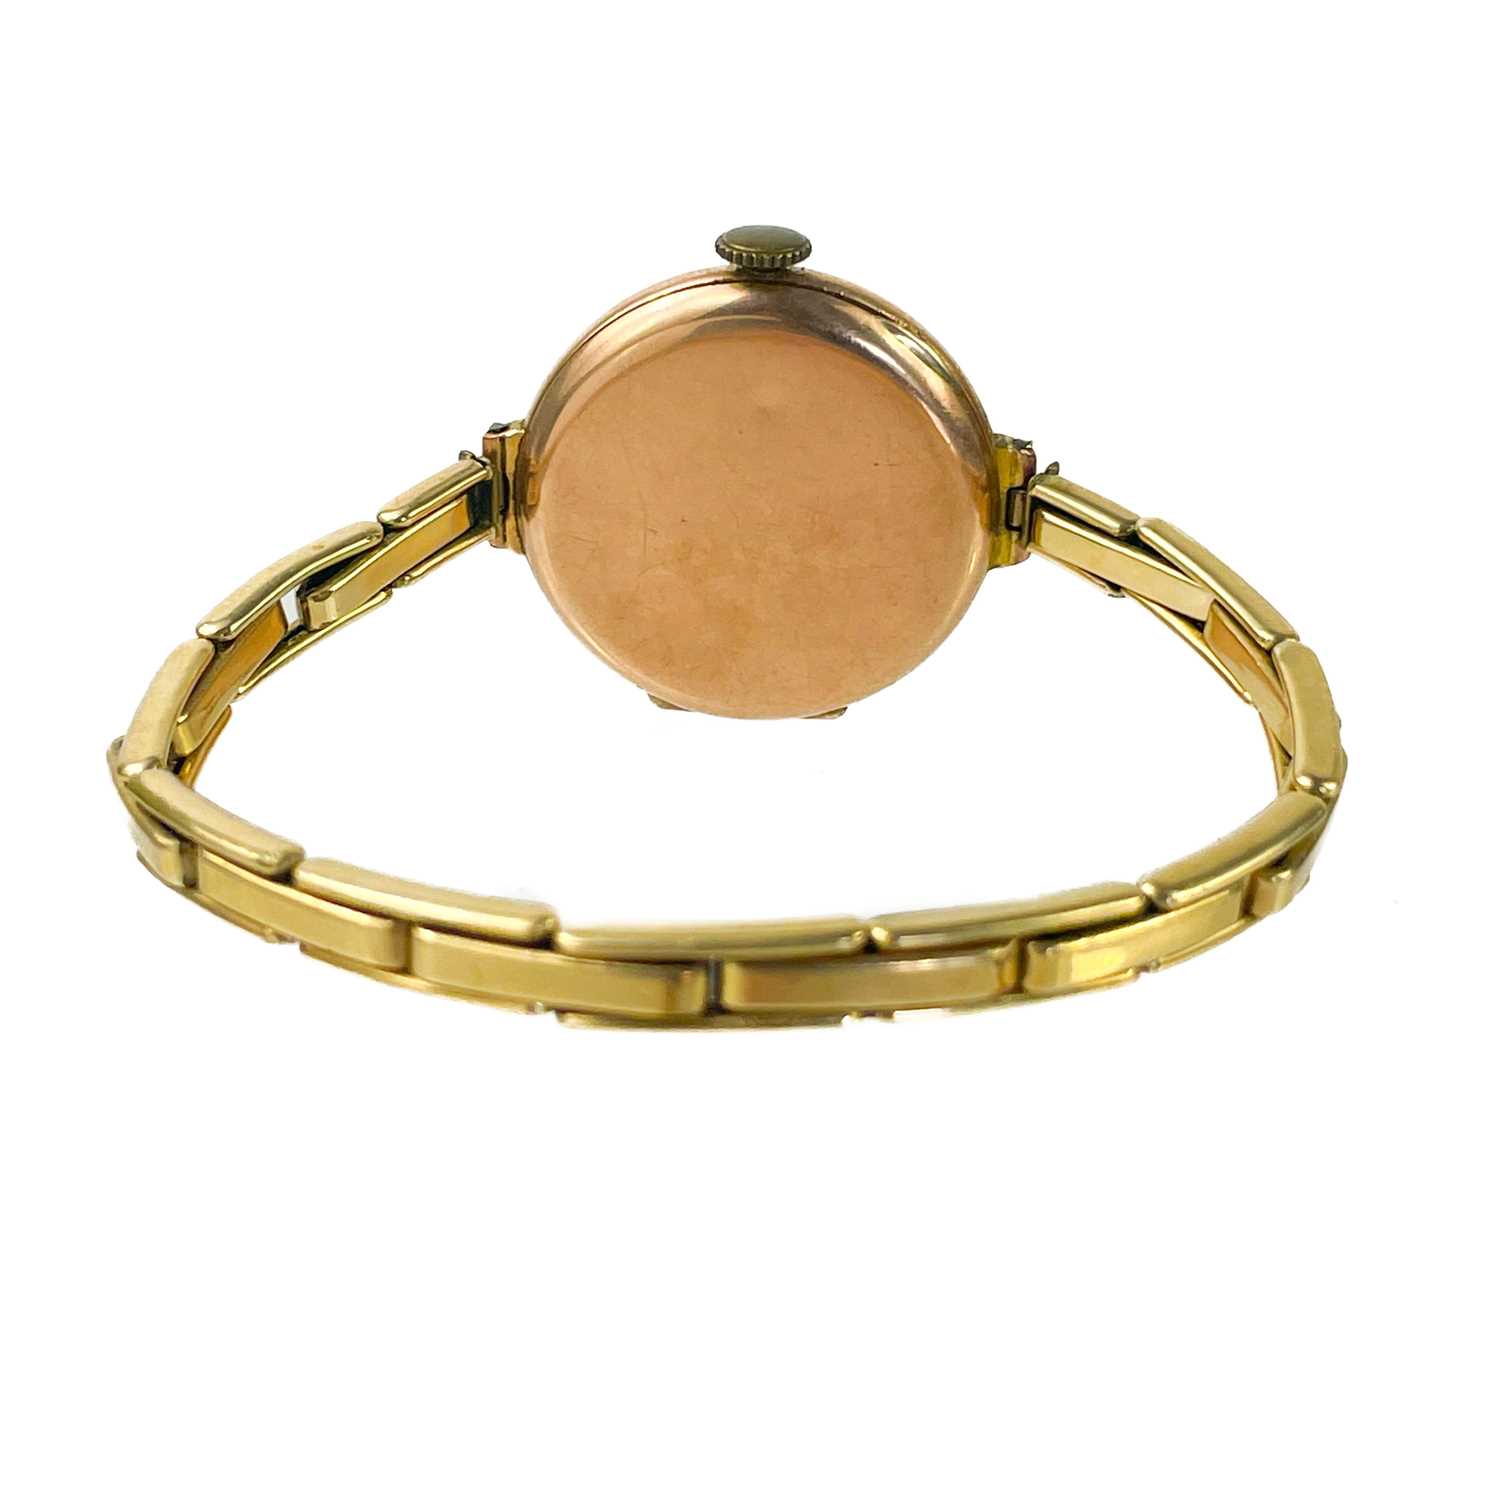 Three 9ct gold-cased lady's manual wind wristwatches and a 9ct expanding bracelet. - Image 3 of 9